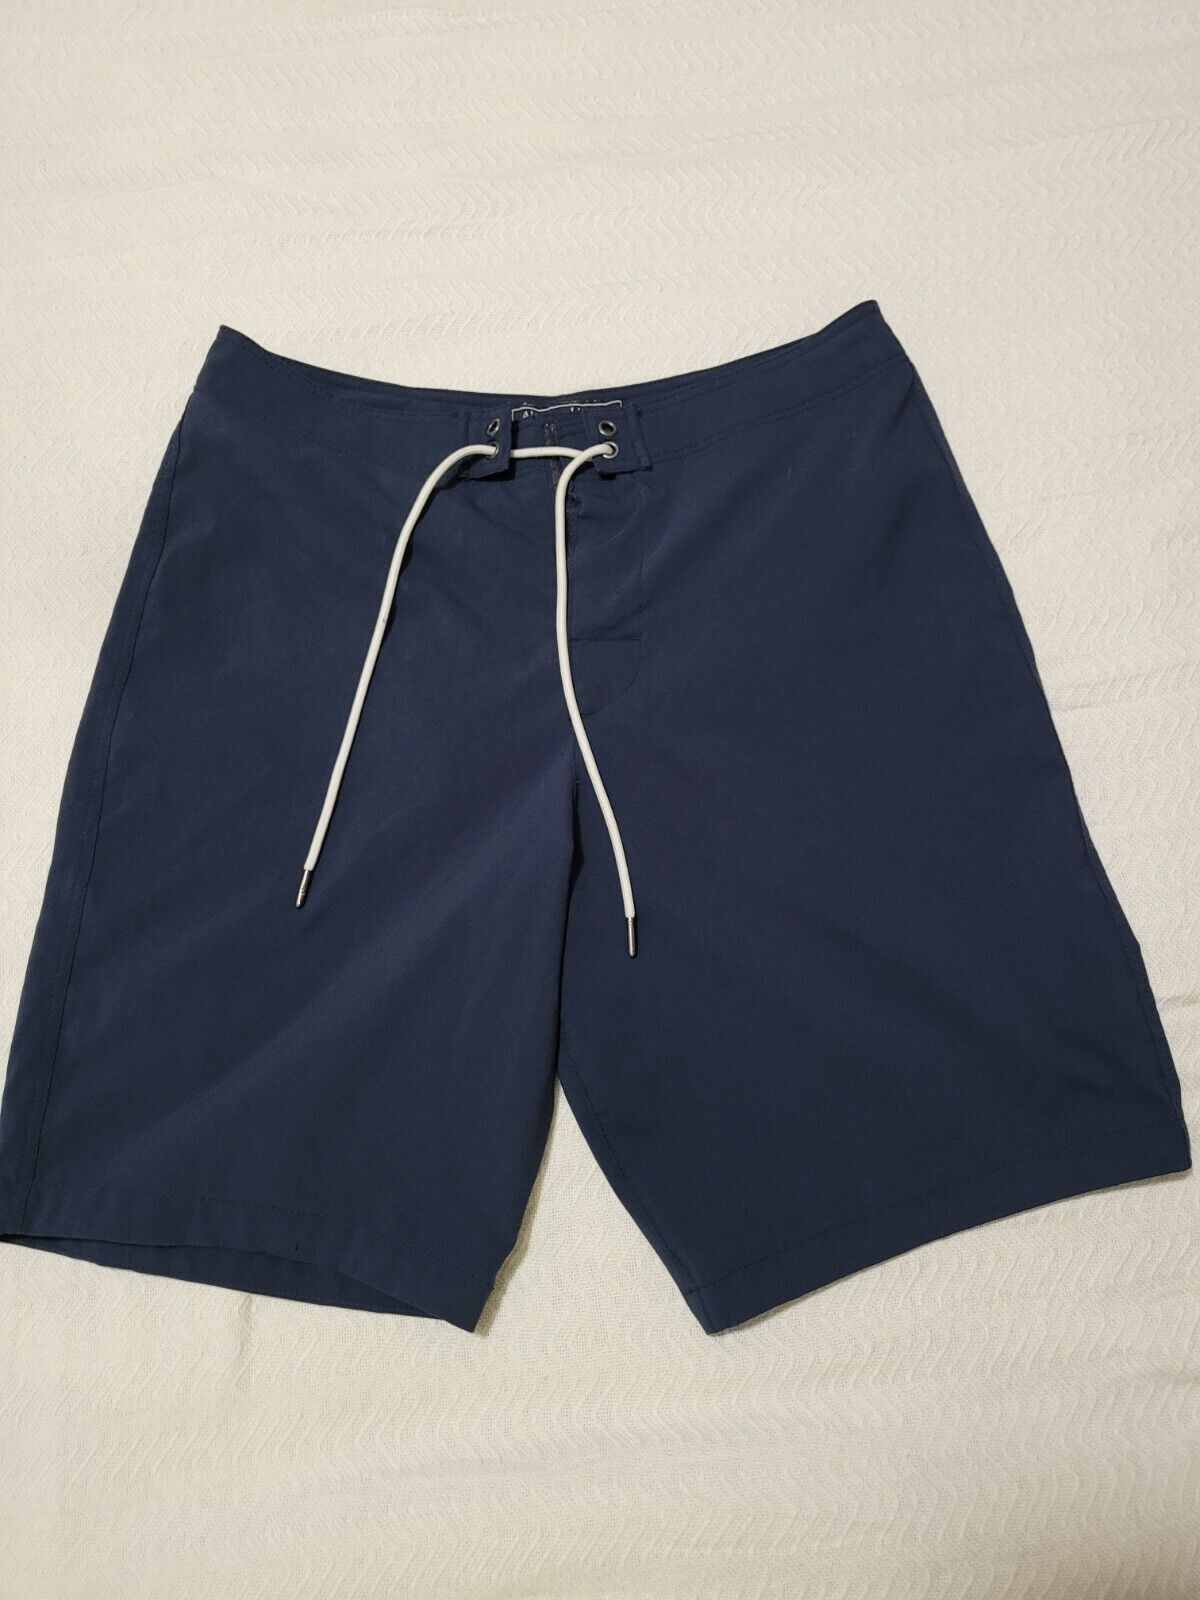 Men Size 29 Abercrombie And Fitch Navy Swim Trunk… - image 1